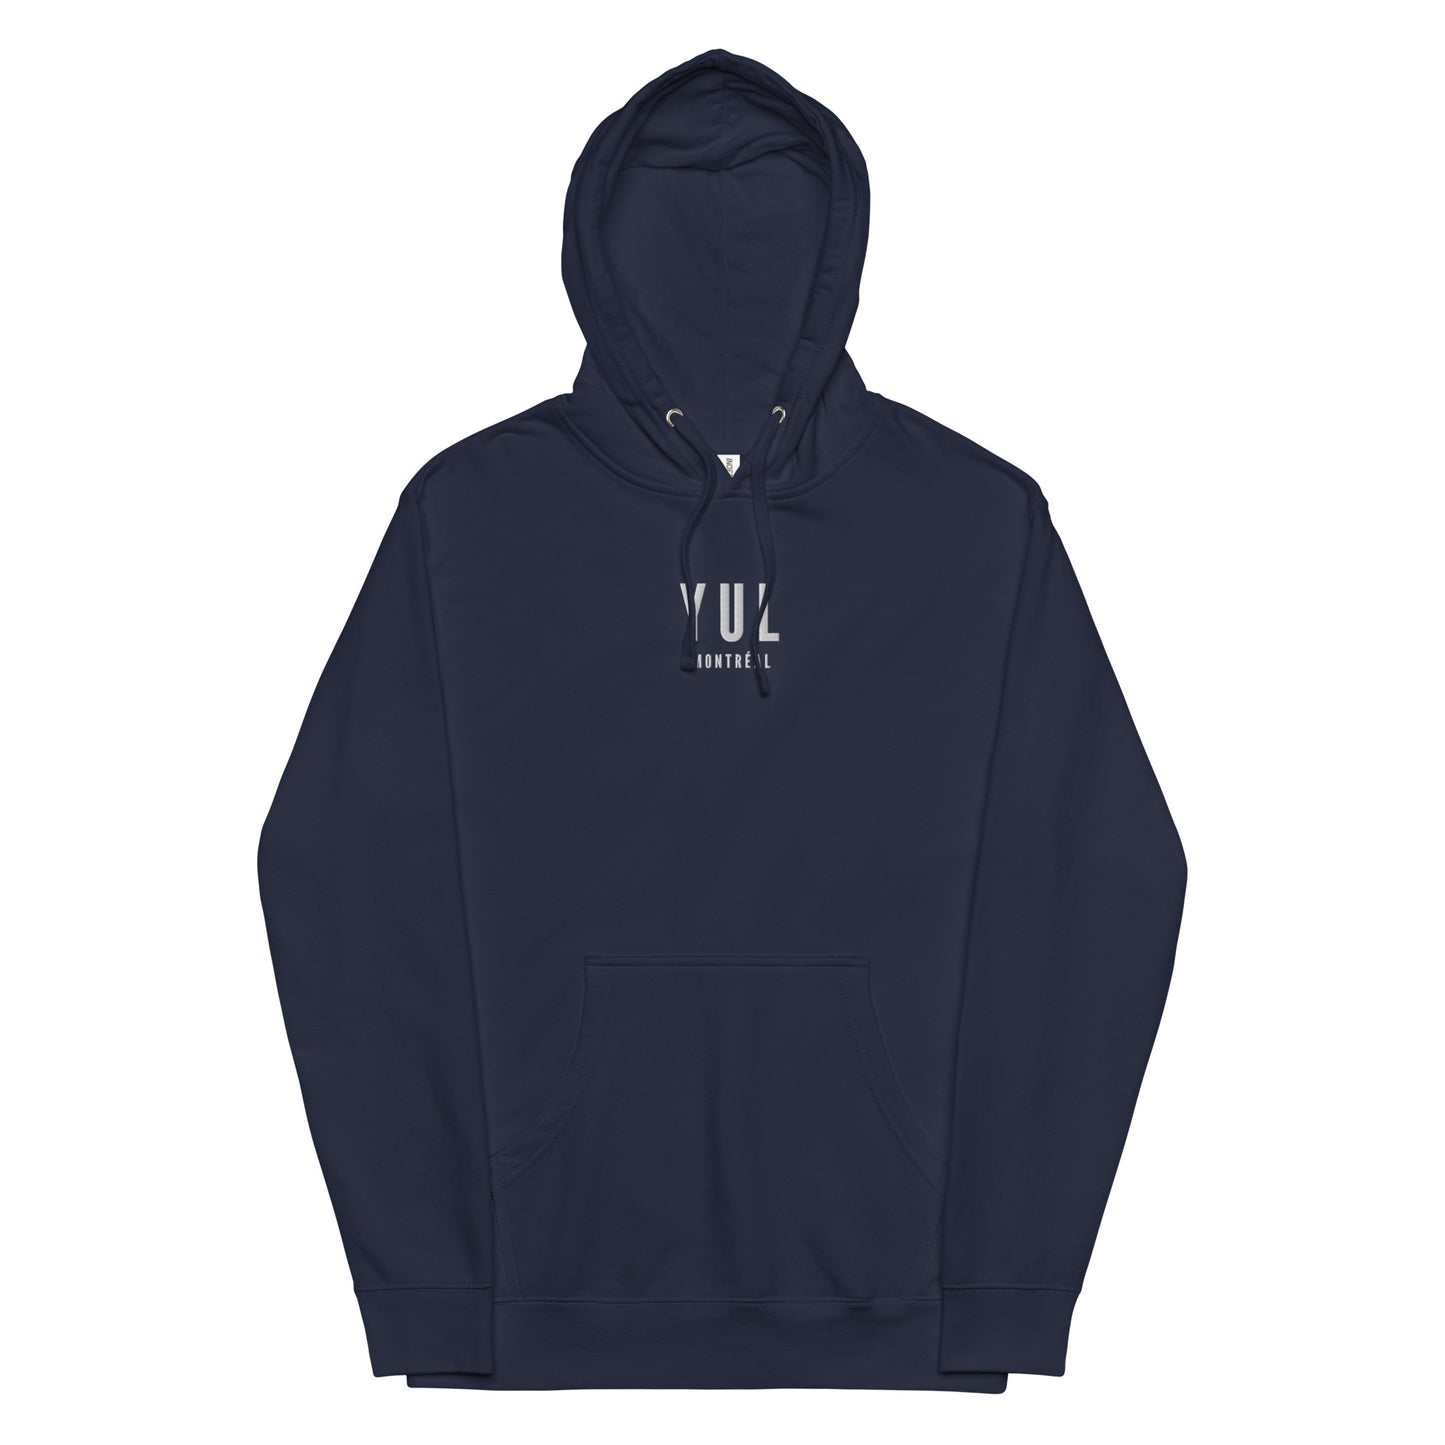 City Midweight Hoodie - White • YUL Montreal • YHM Designs - Image 11